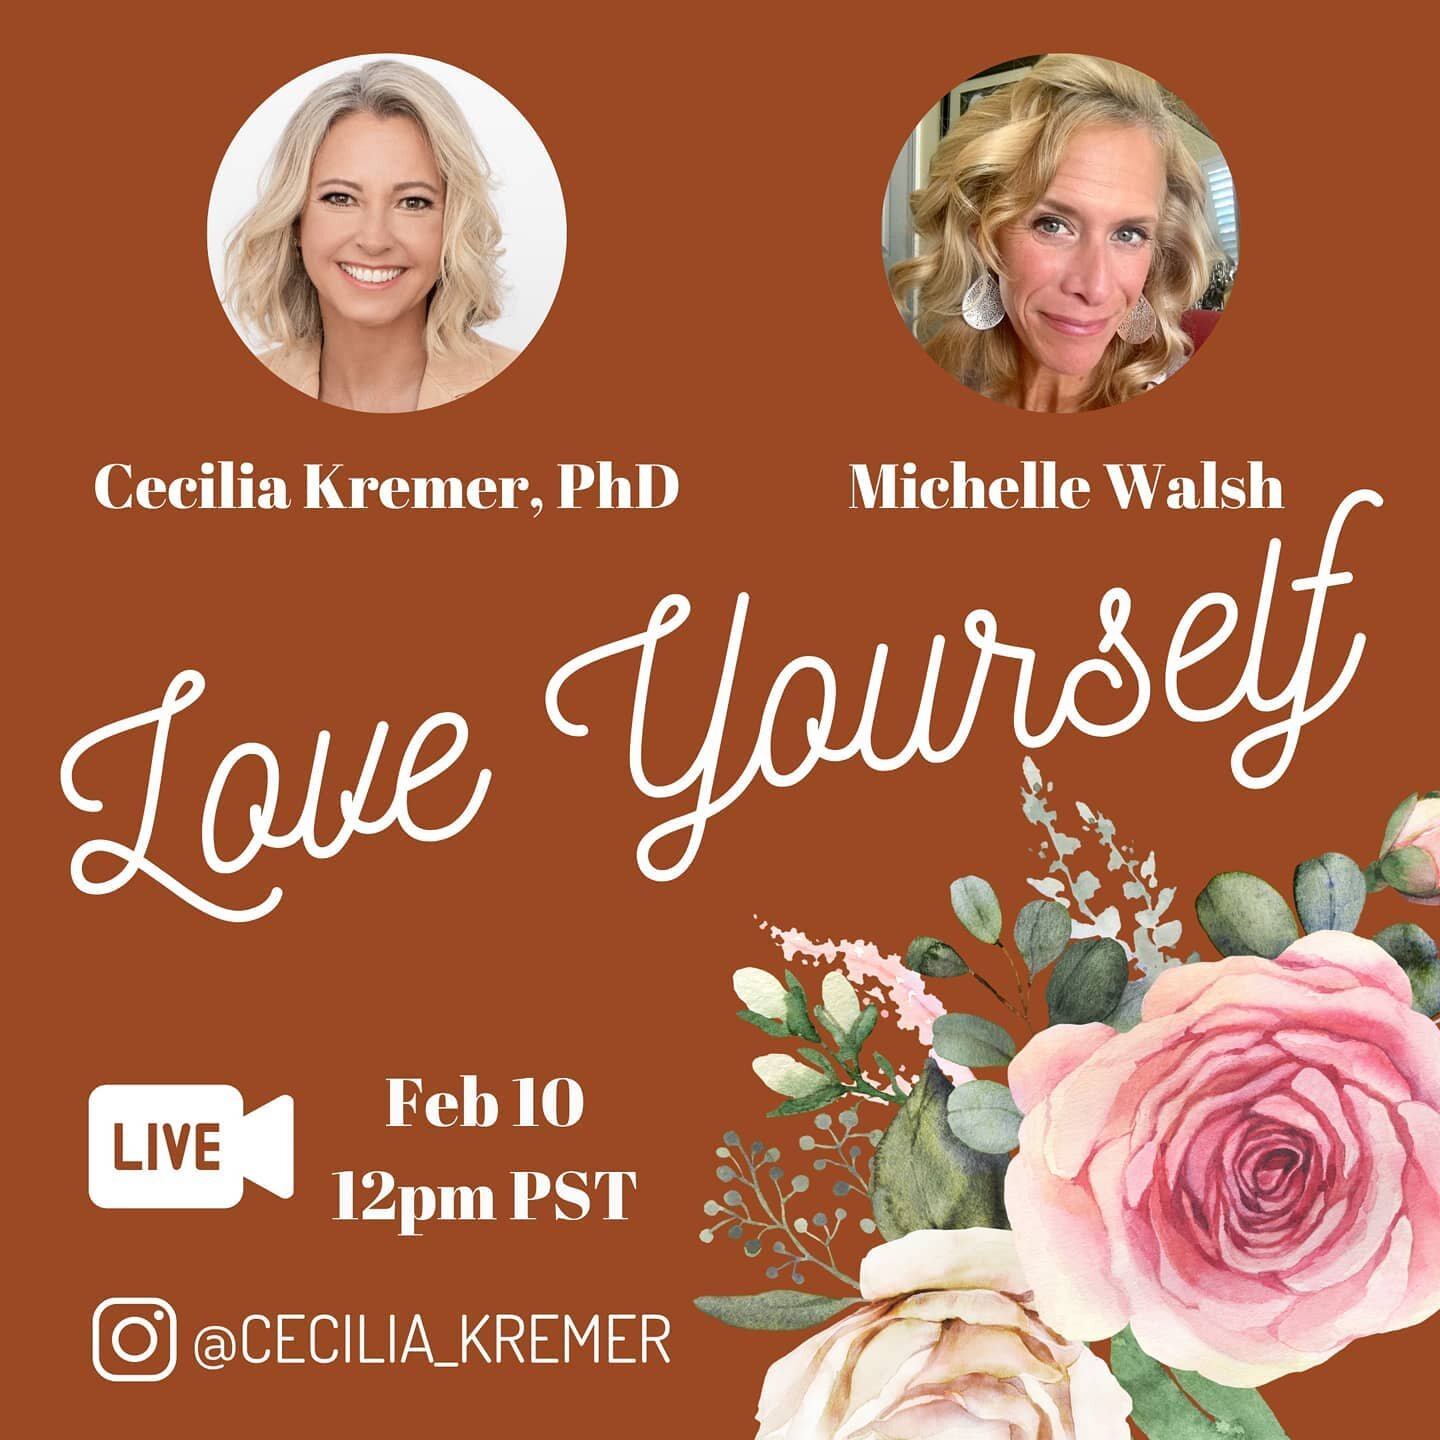 Make this Valentine's day about that person that never leaves you - yourself! Michelle @myvillagewell and I will talk about self-love 💝 And how developing empathy for yourself fills up your heart 💗 When your inner well is full, love can flow out to